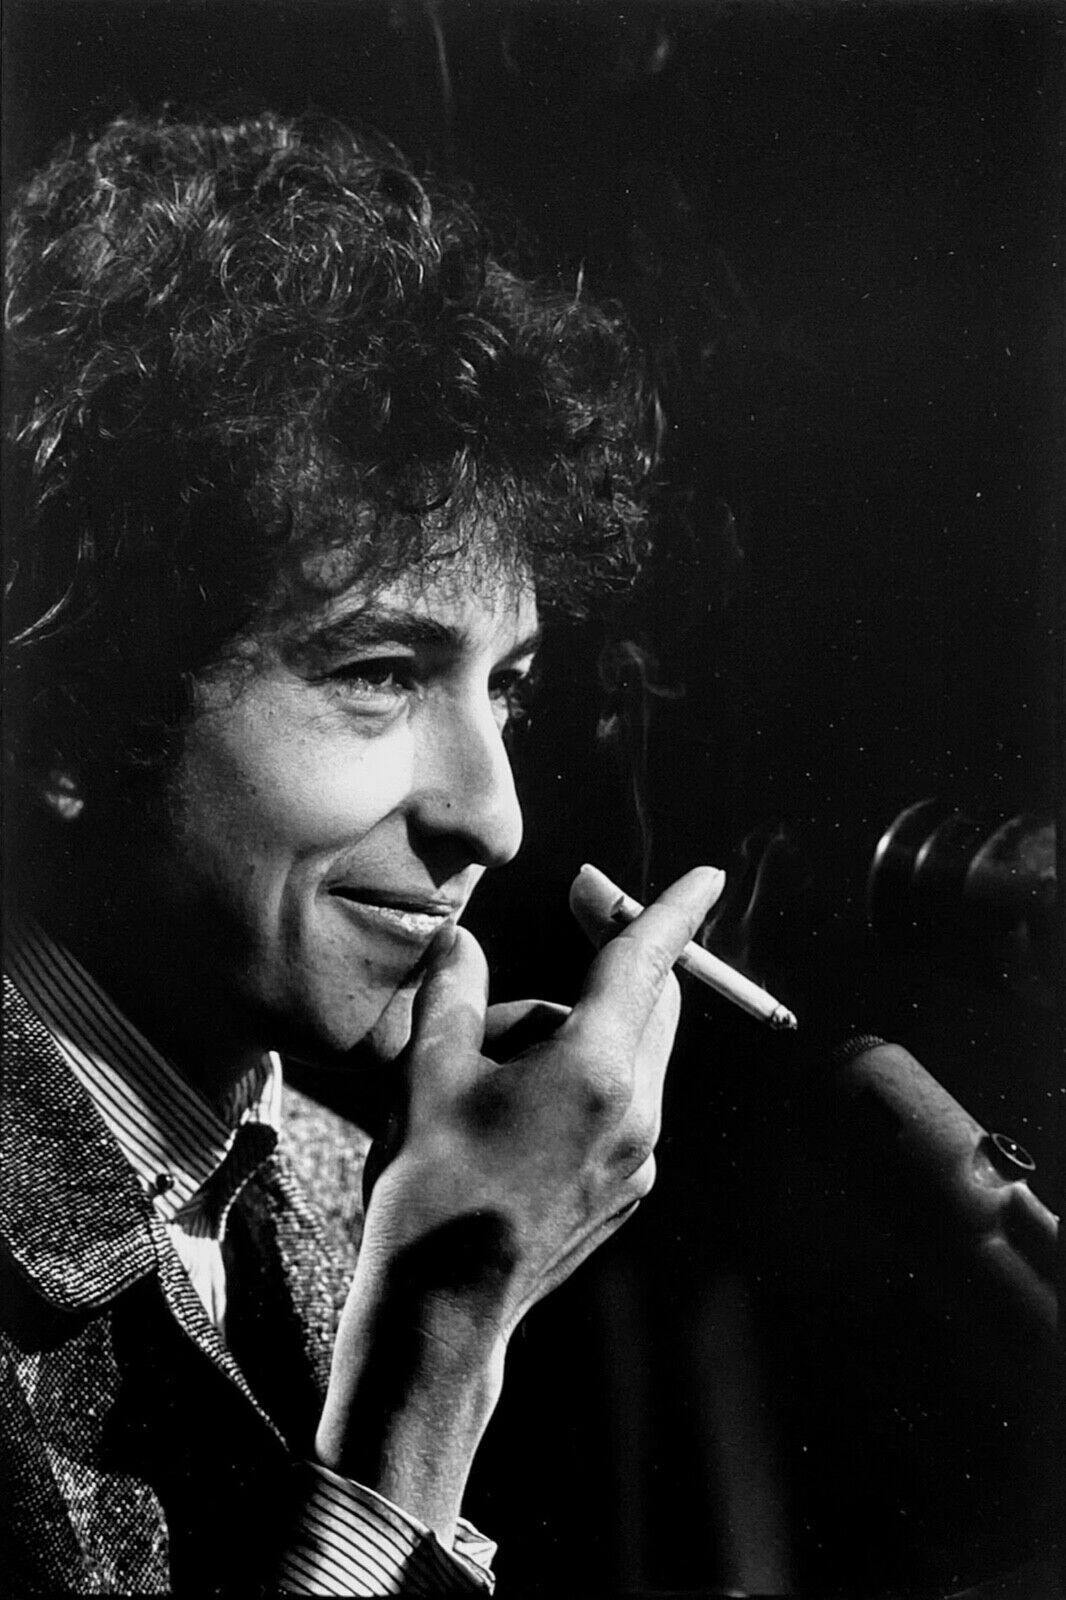 Bob Dylan photograph signed by Jim Marshall